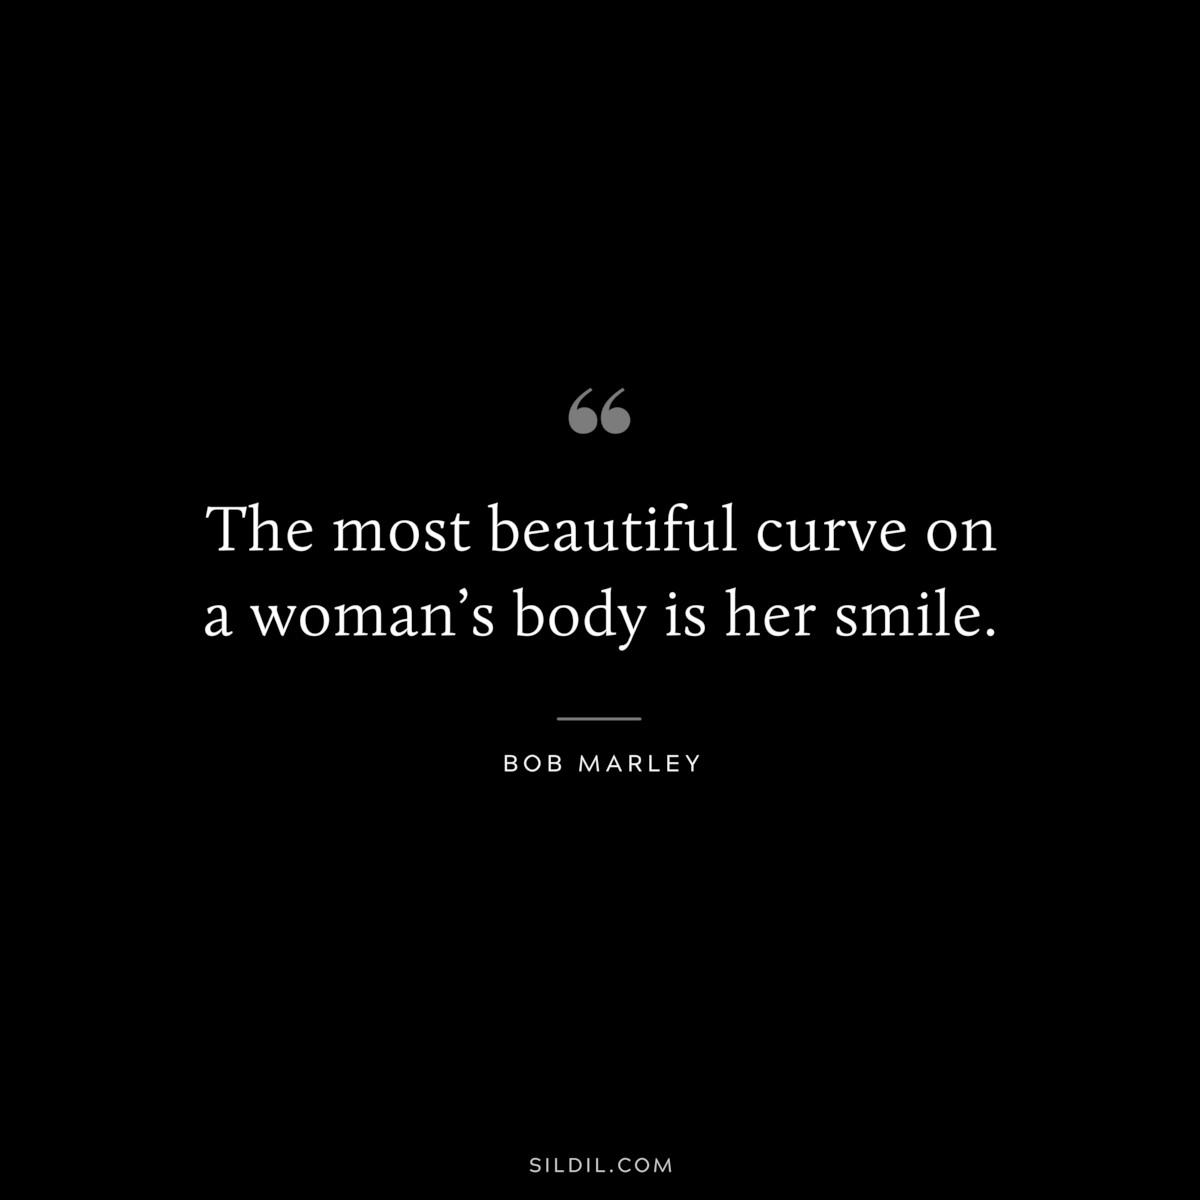 The most beautiful curve on a woman’s body is her smile. ― Bob Marley